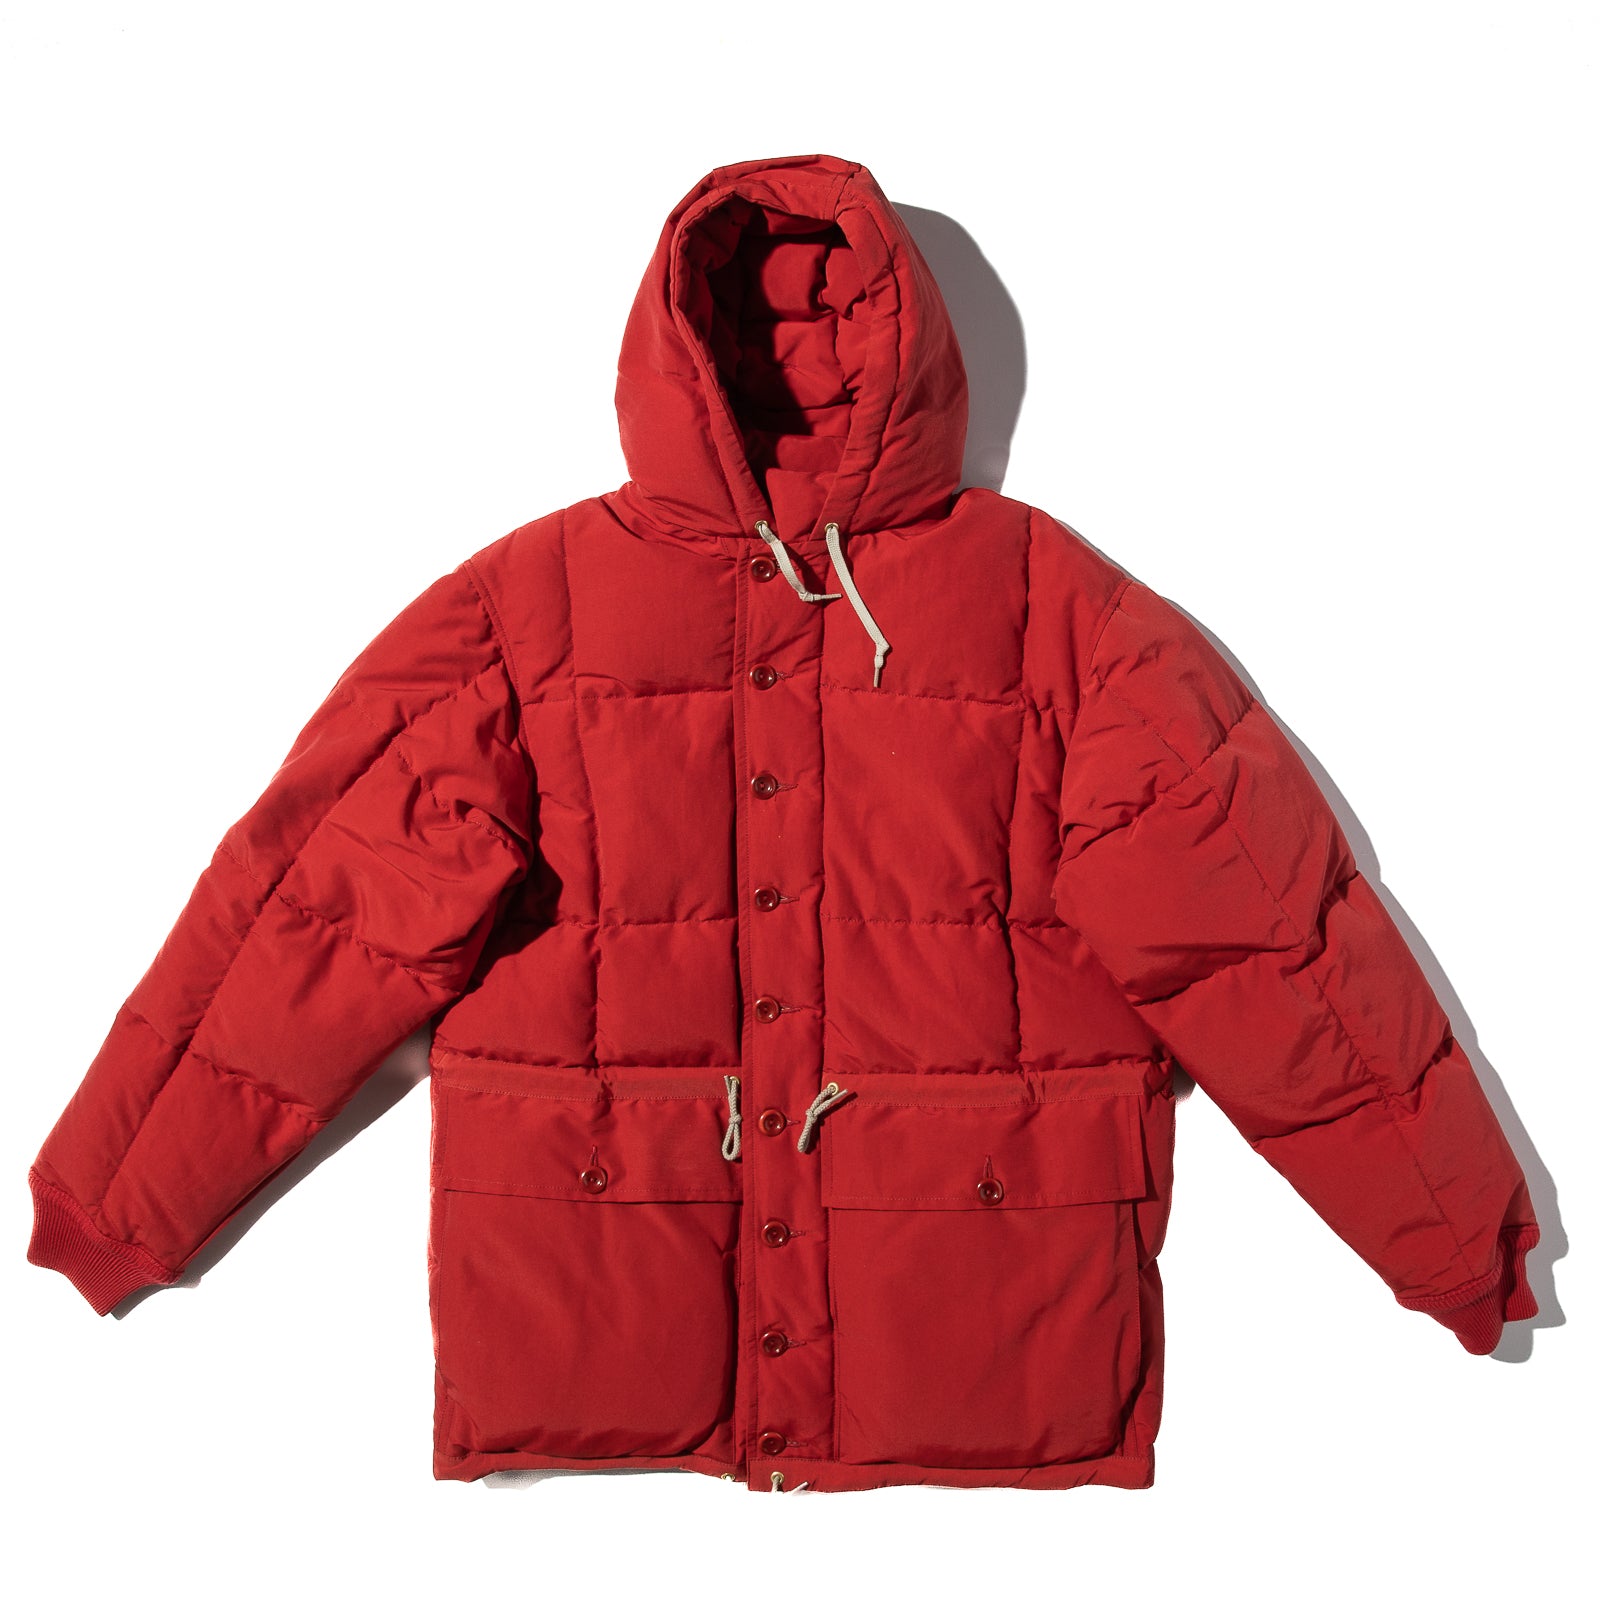 Cotton/Nylon Hooded Down Jacket - Red